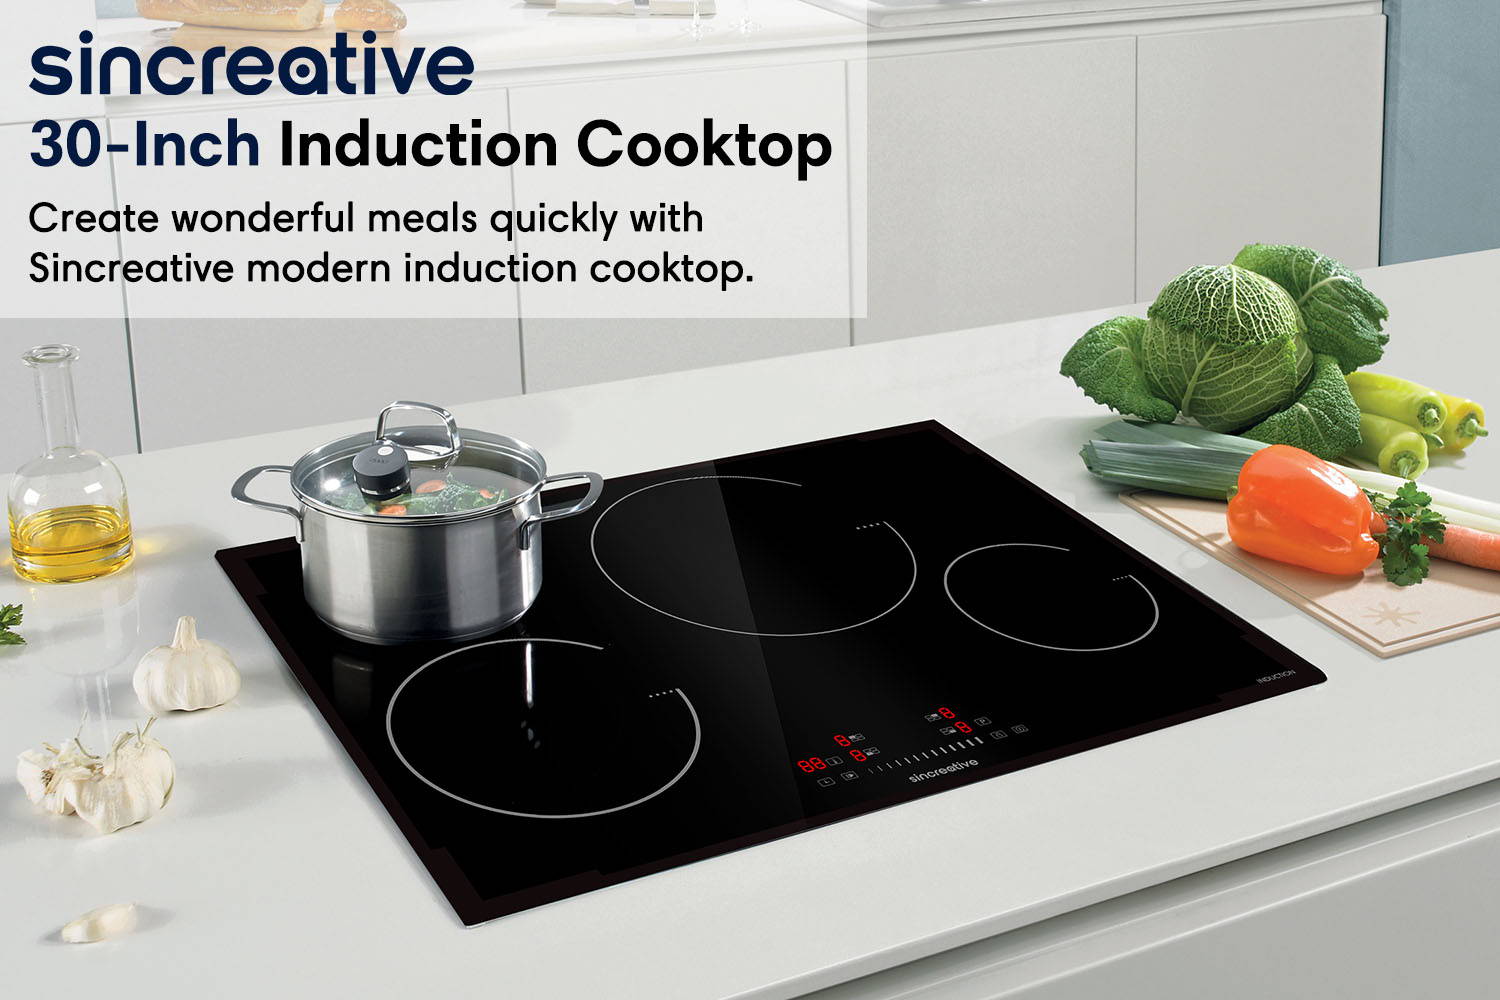 30 inch induction cooktop creat wonderful meals quickly with sincreative modern induction cooktop.